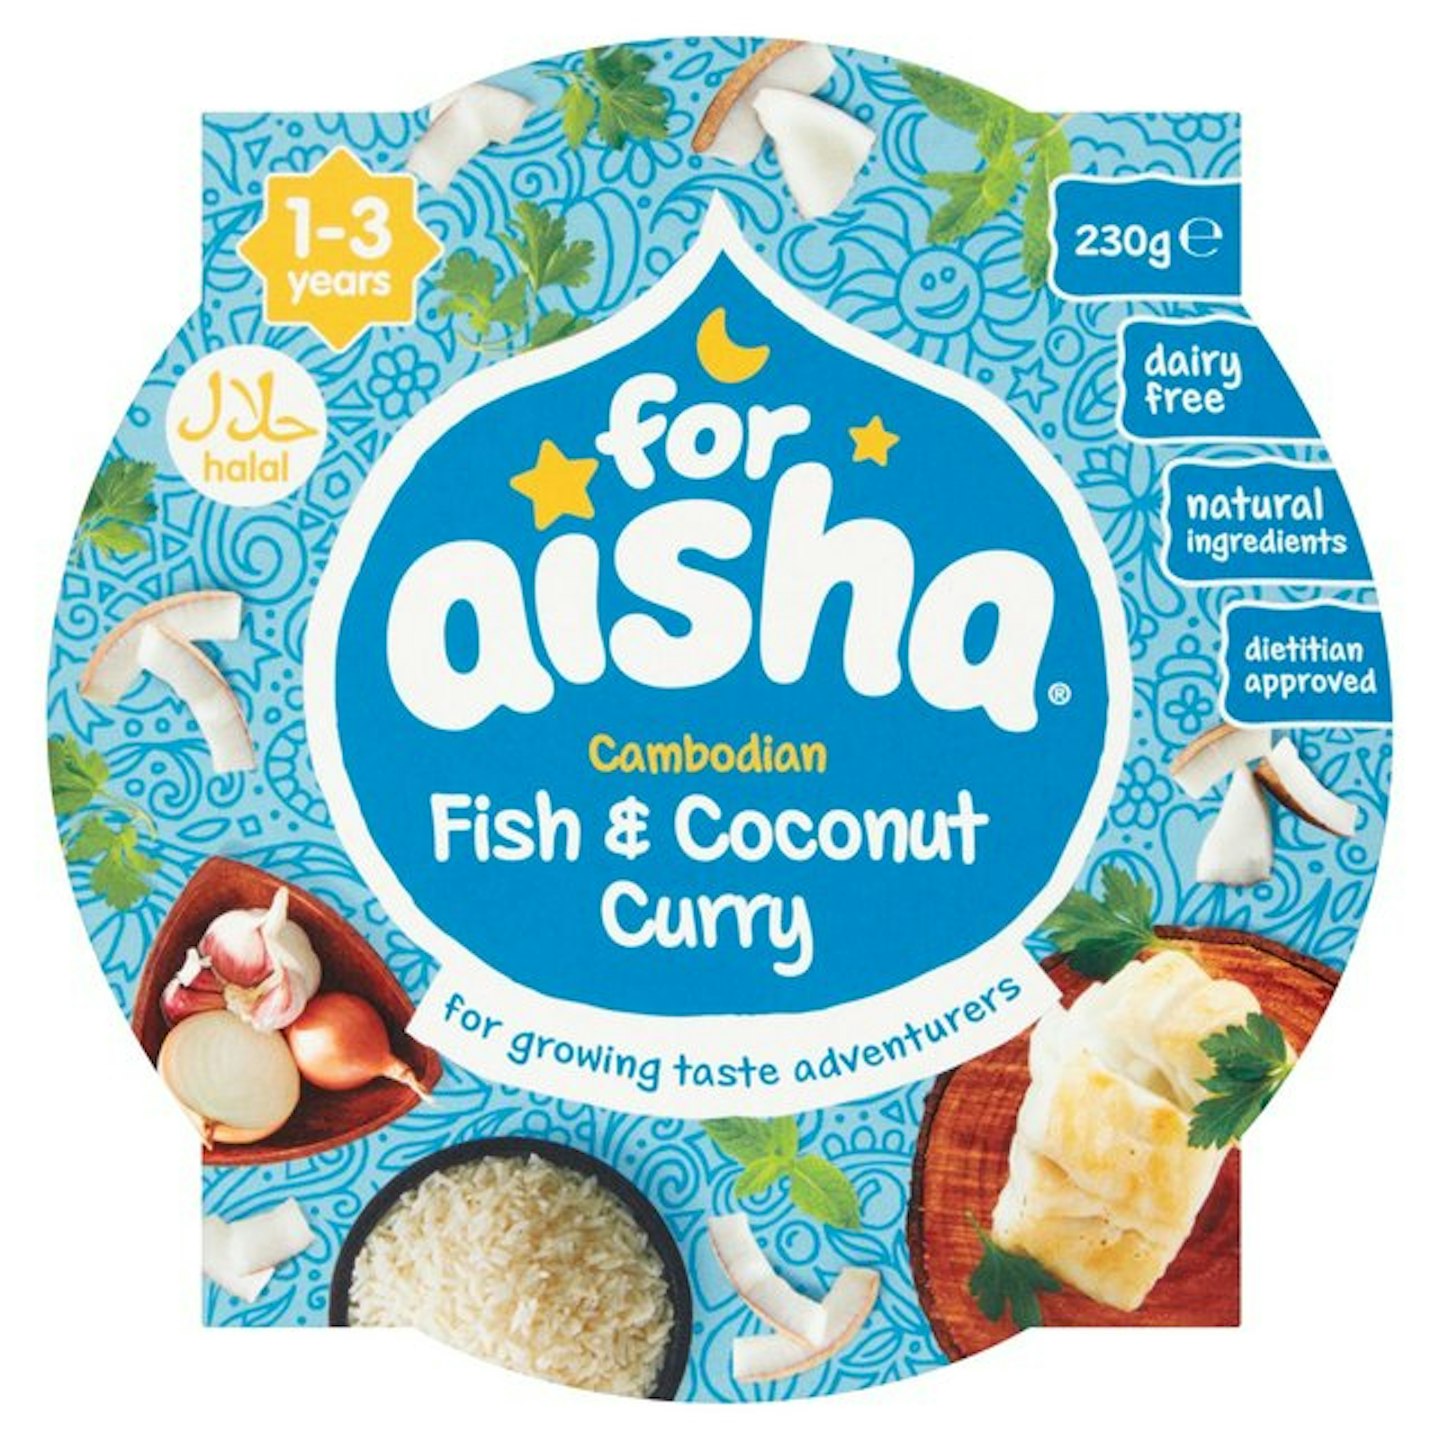 For Aisha Cambodian Fish & Coconut Curry